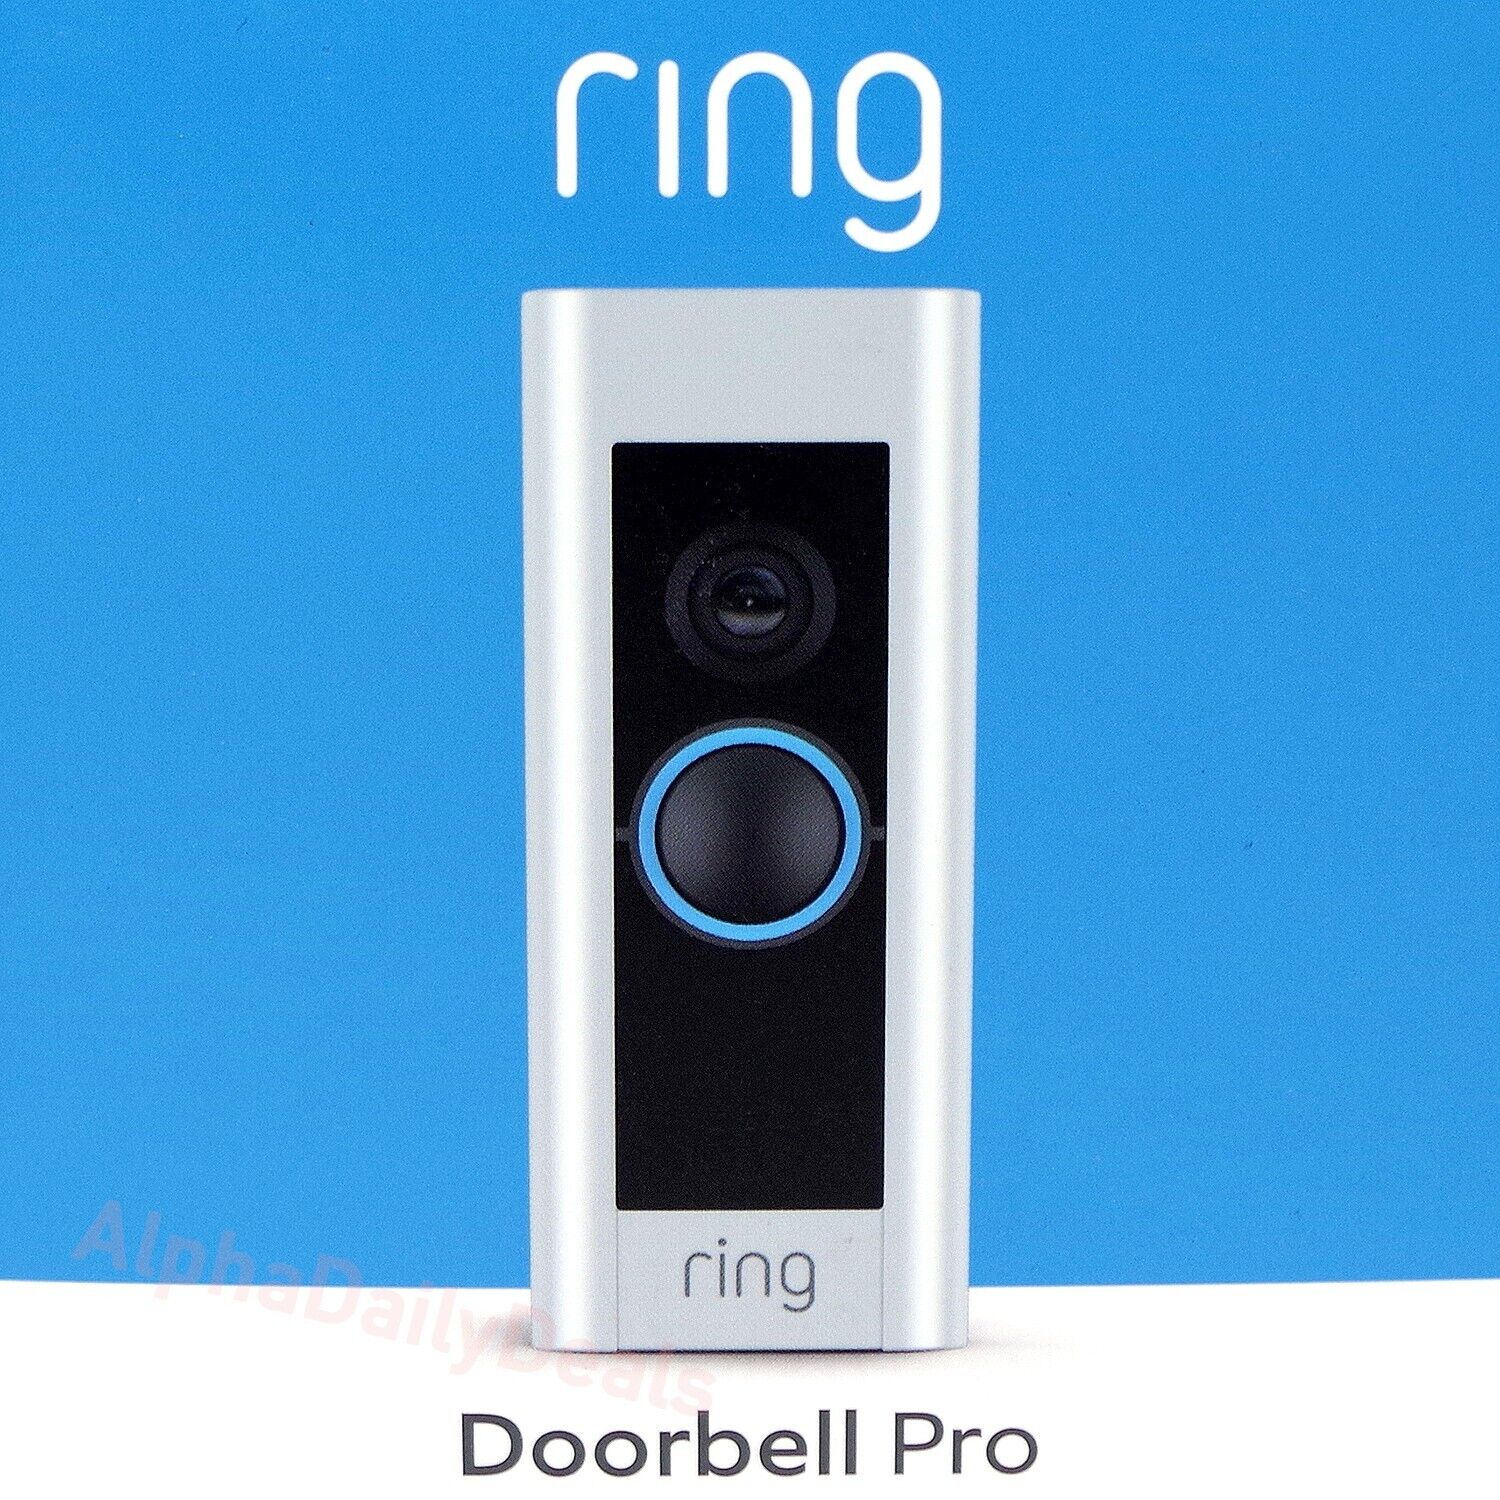 NEW Ring Doorbell Pro HD Video Smart Wi-Fi Wired Built-In Alexa Night Vision